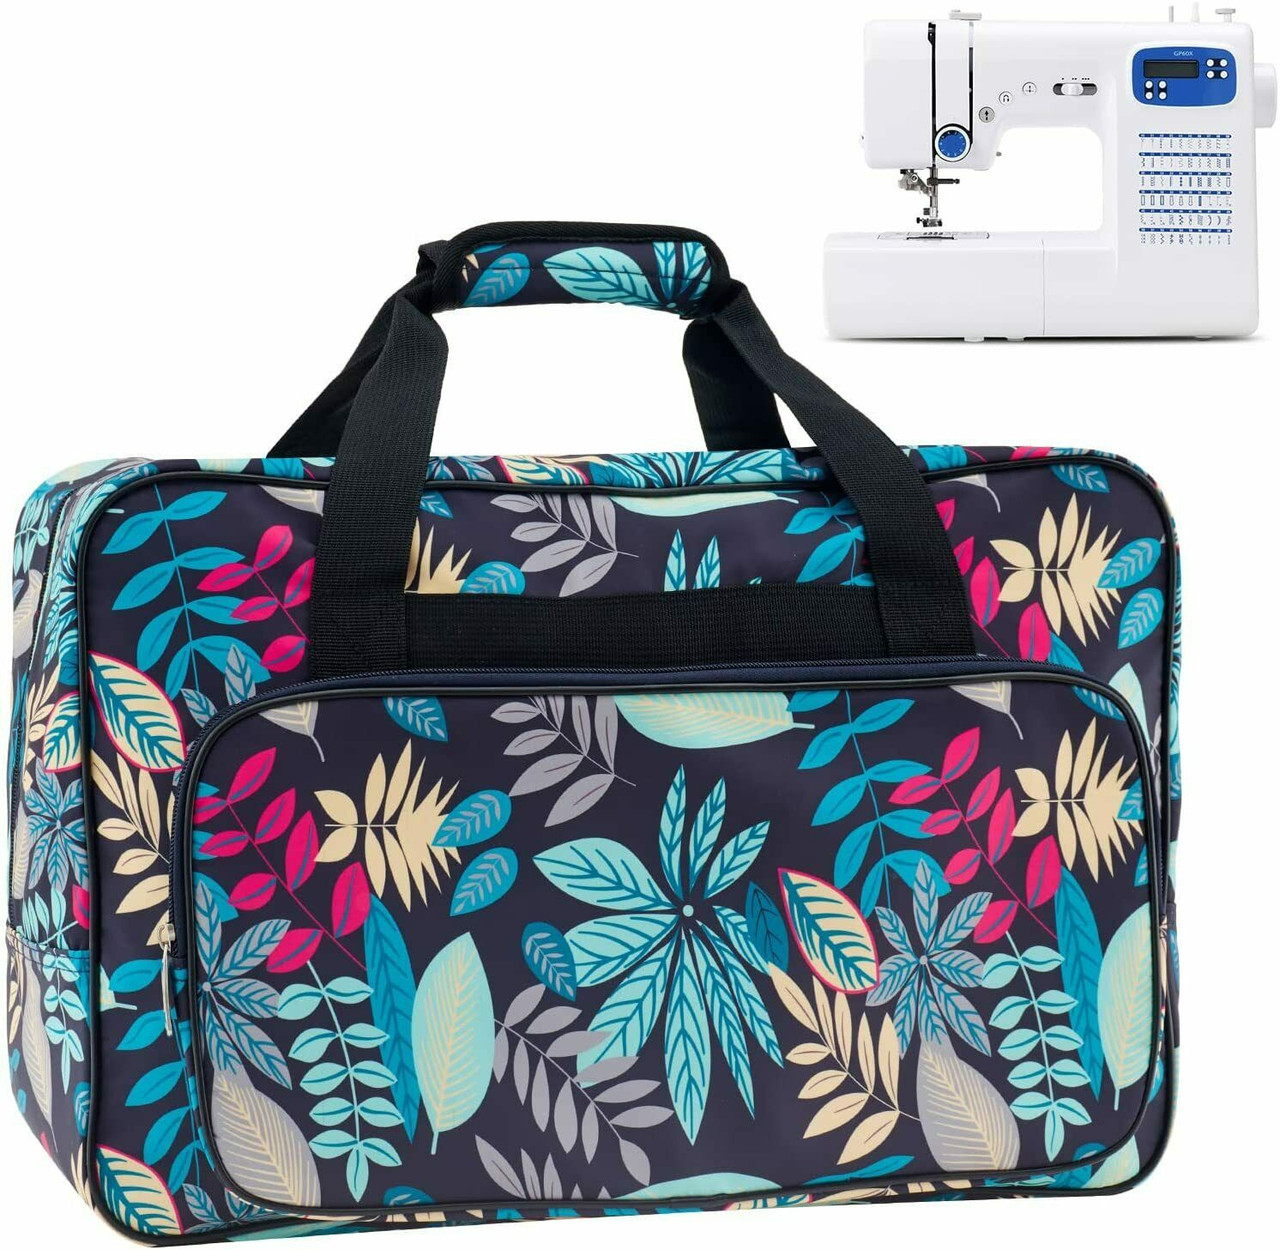 Sewing Machine Cases, Sewing Machine Totes - Sewing Parts Online